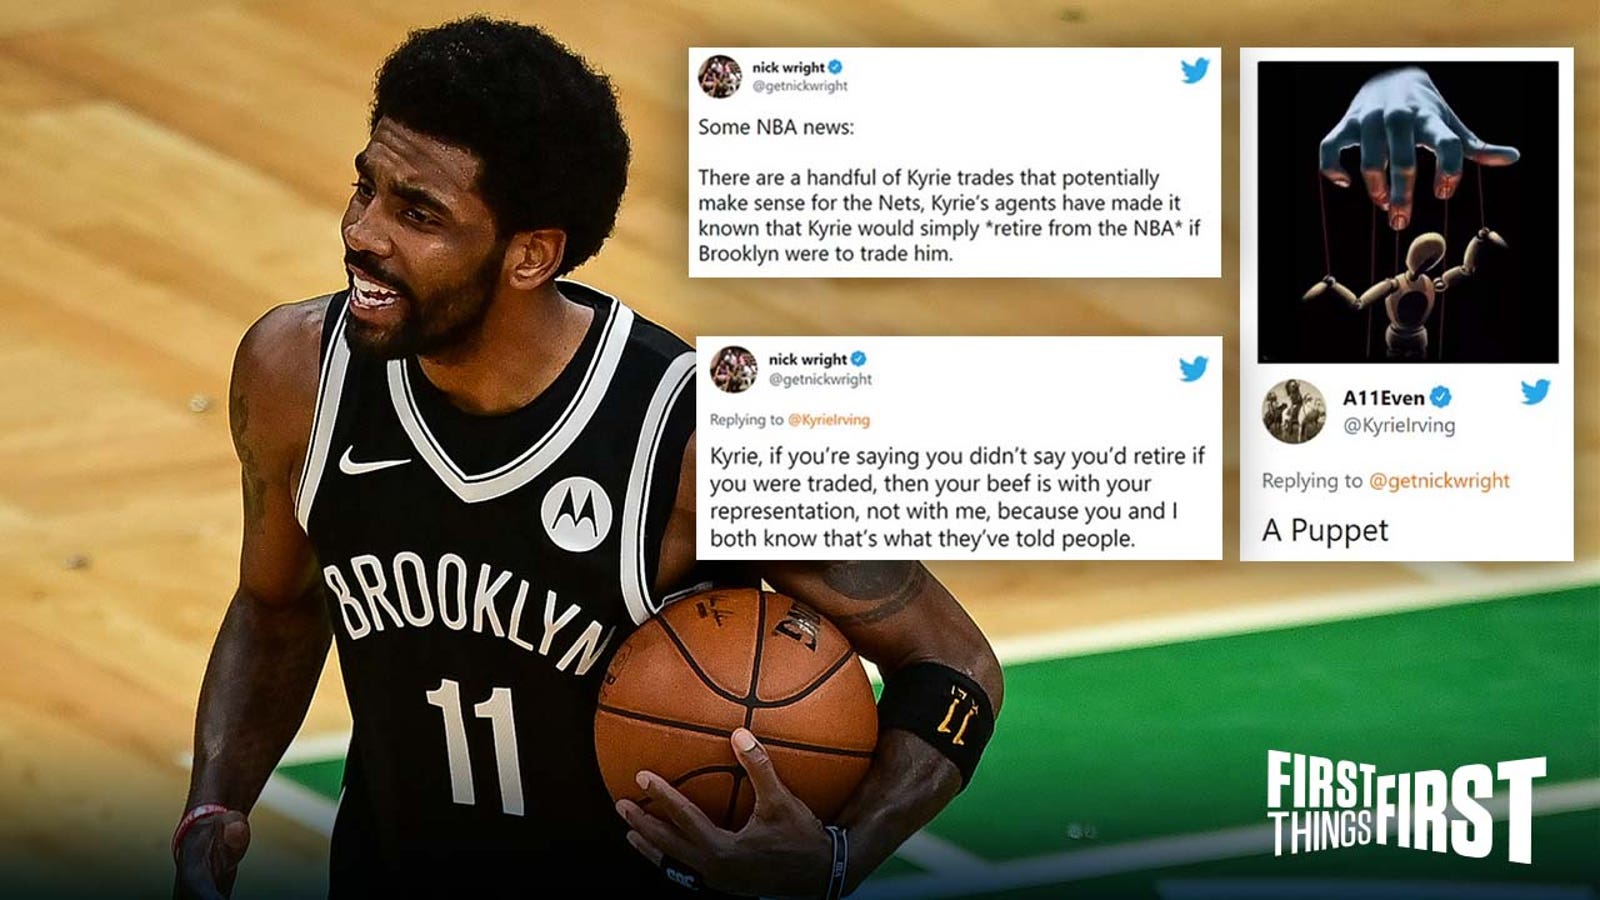 Nick Wright isn't backing down from Kyrie Irving after reporting he'd rather retire than be traded I FIRST THINGS FIRST